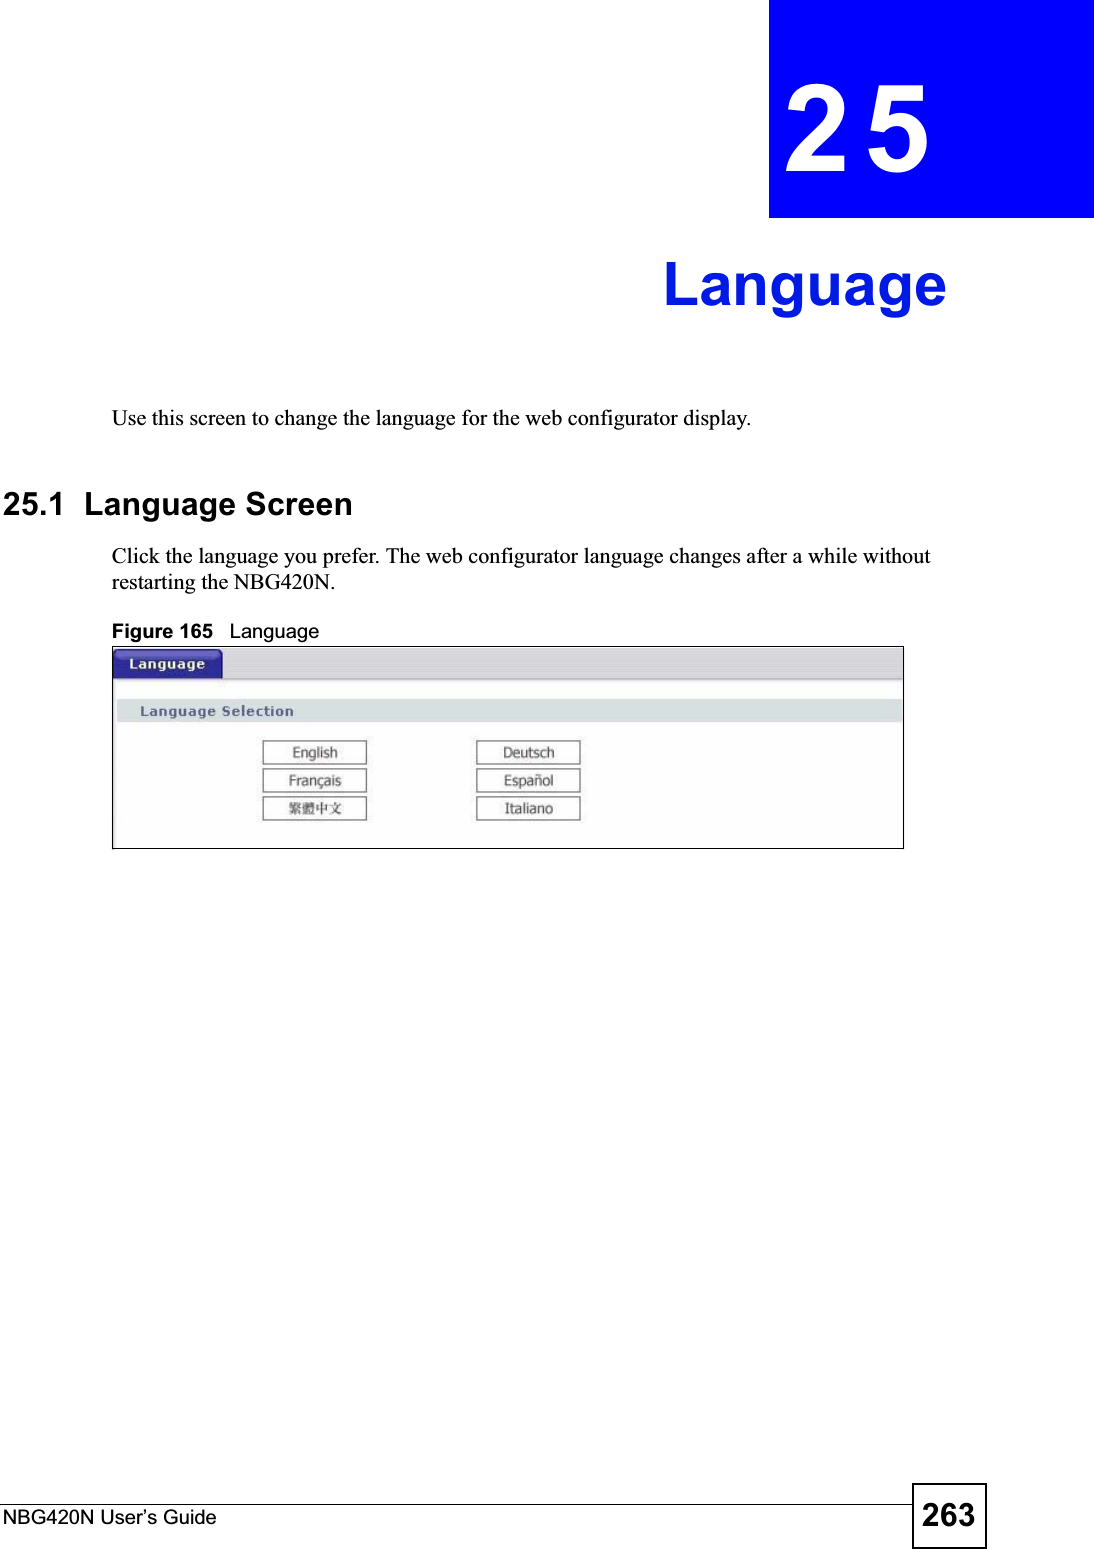 NBG420N User’s Guide 263CHAPTER 25LanguageUse this screen to change the language for the web configurator display.25.1  Language ScreenClick the language you prefer. The web configurator language changes after a while without restarting the NBG420N.Figure 165   Language